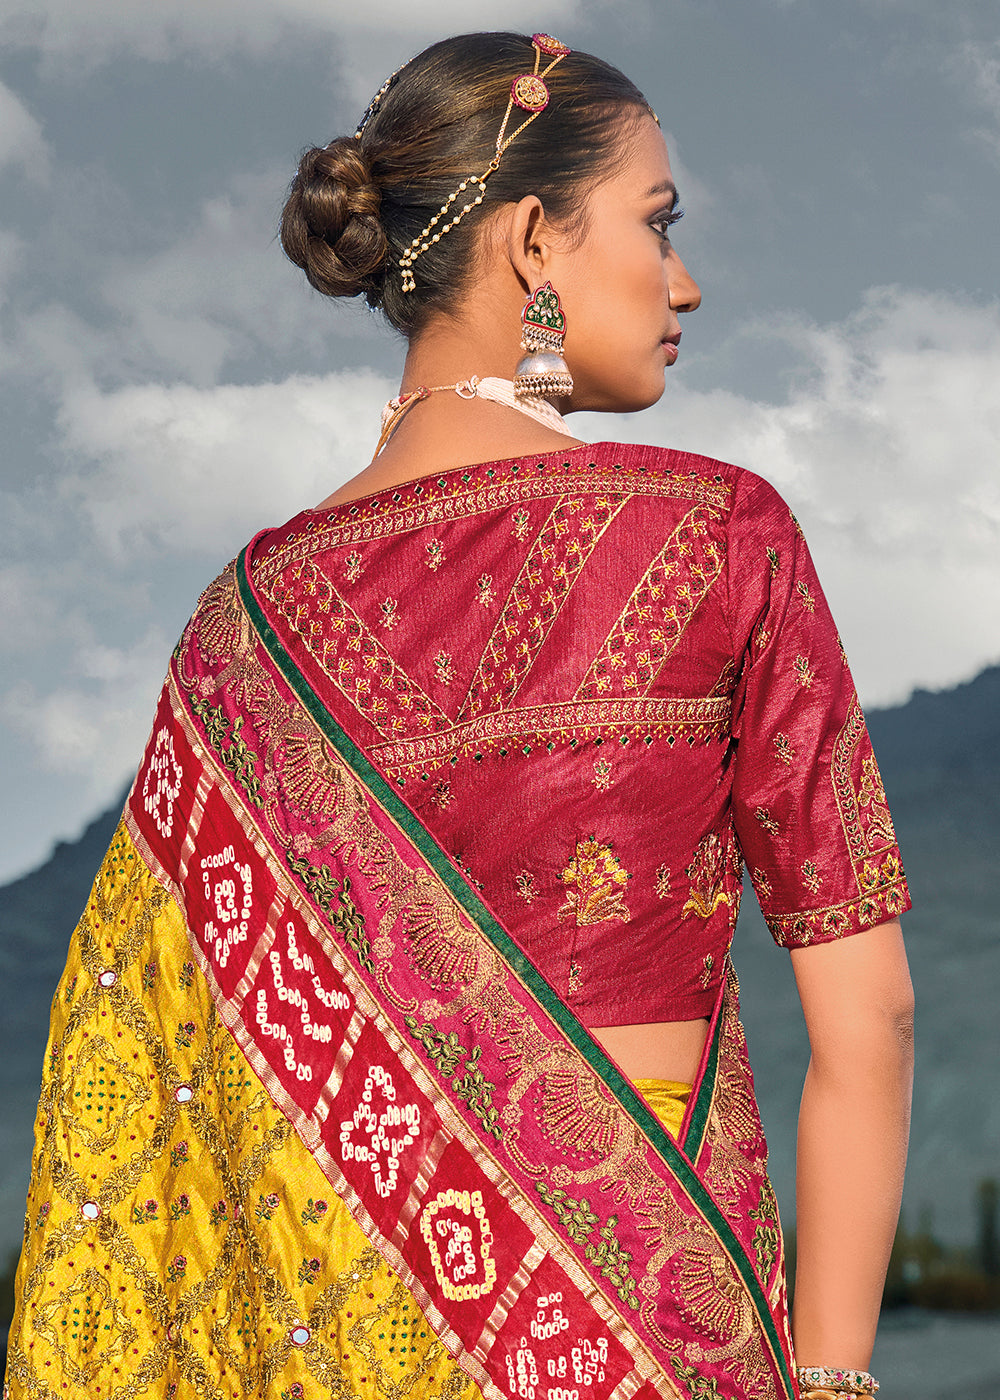 Shop Now Traditional Mustard Embroidered Kachhi Bandhej Sateen Saree Saree from Empress Clothing in USA, UK, Canada & Worldwide. 